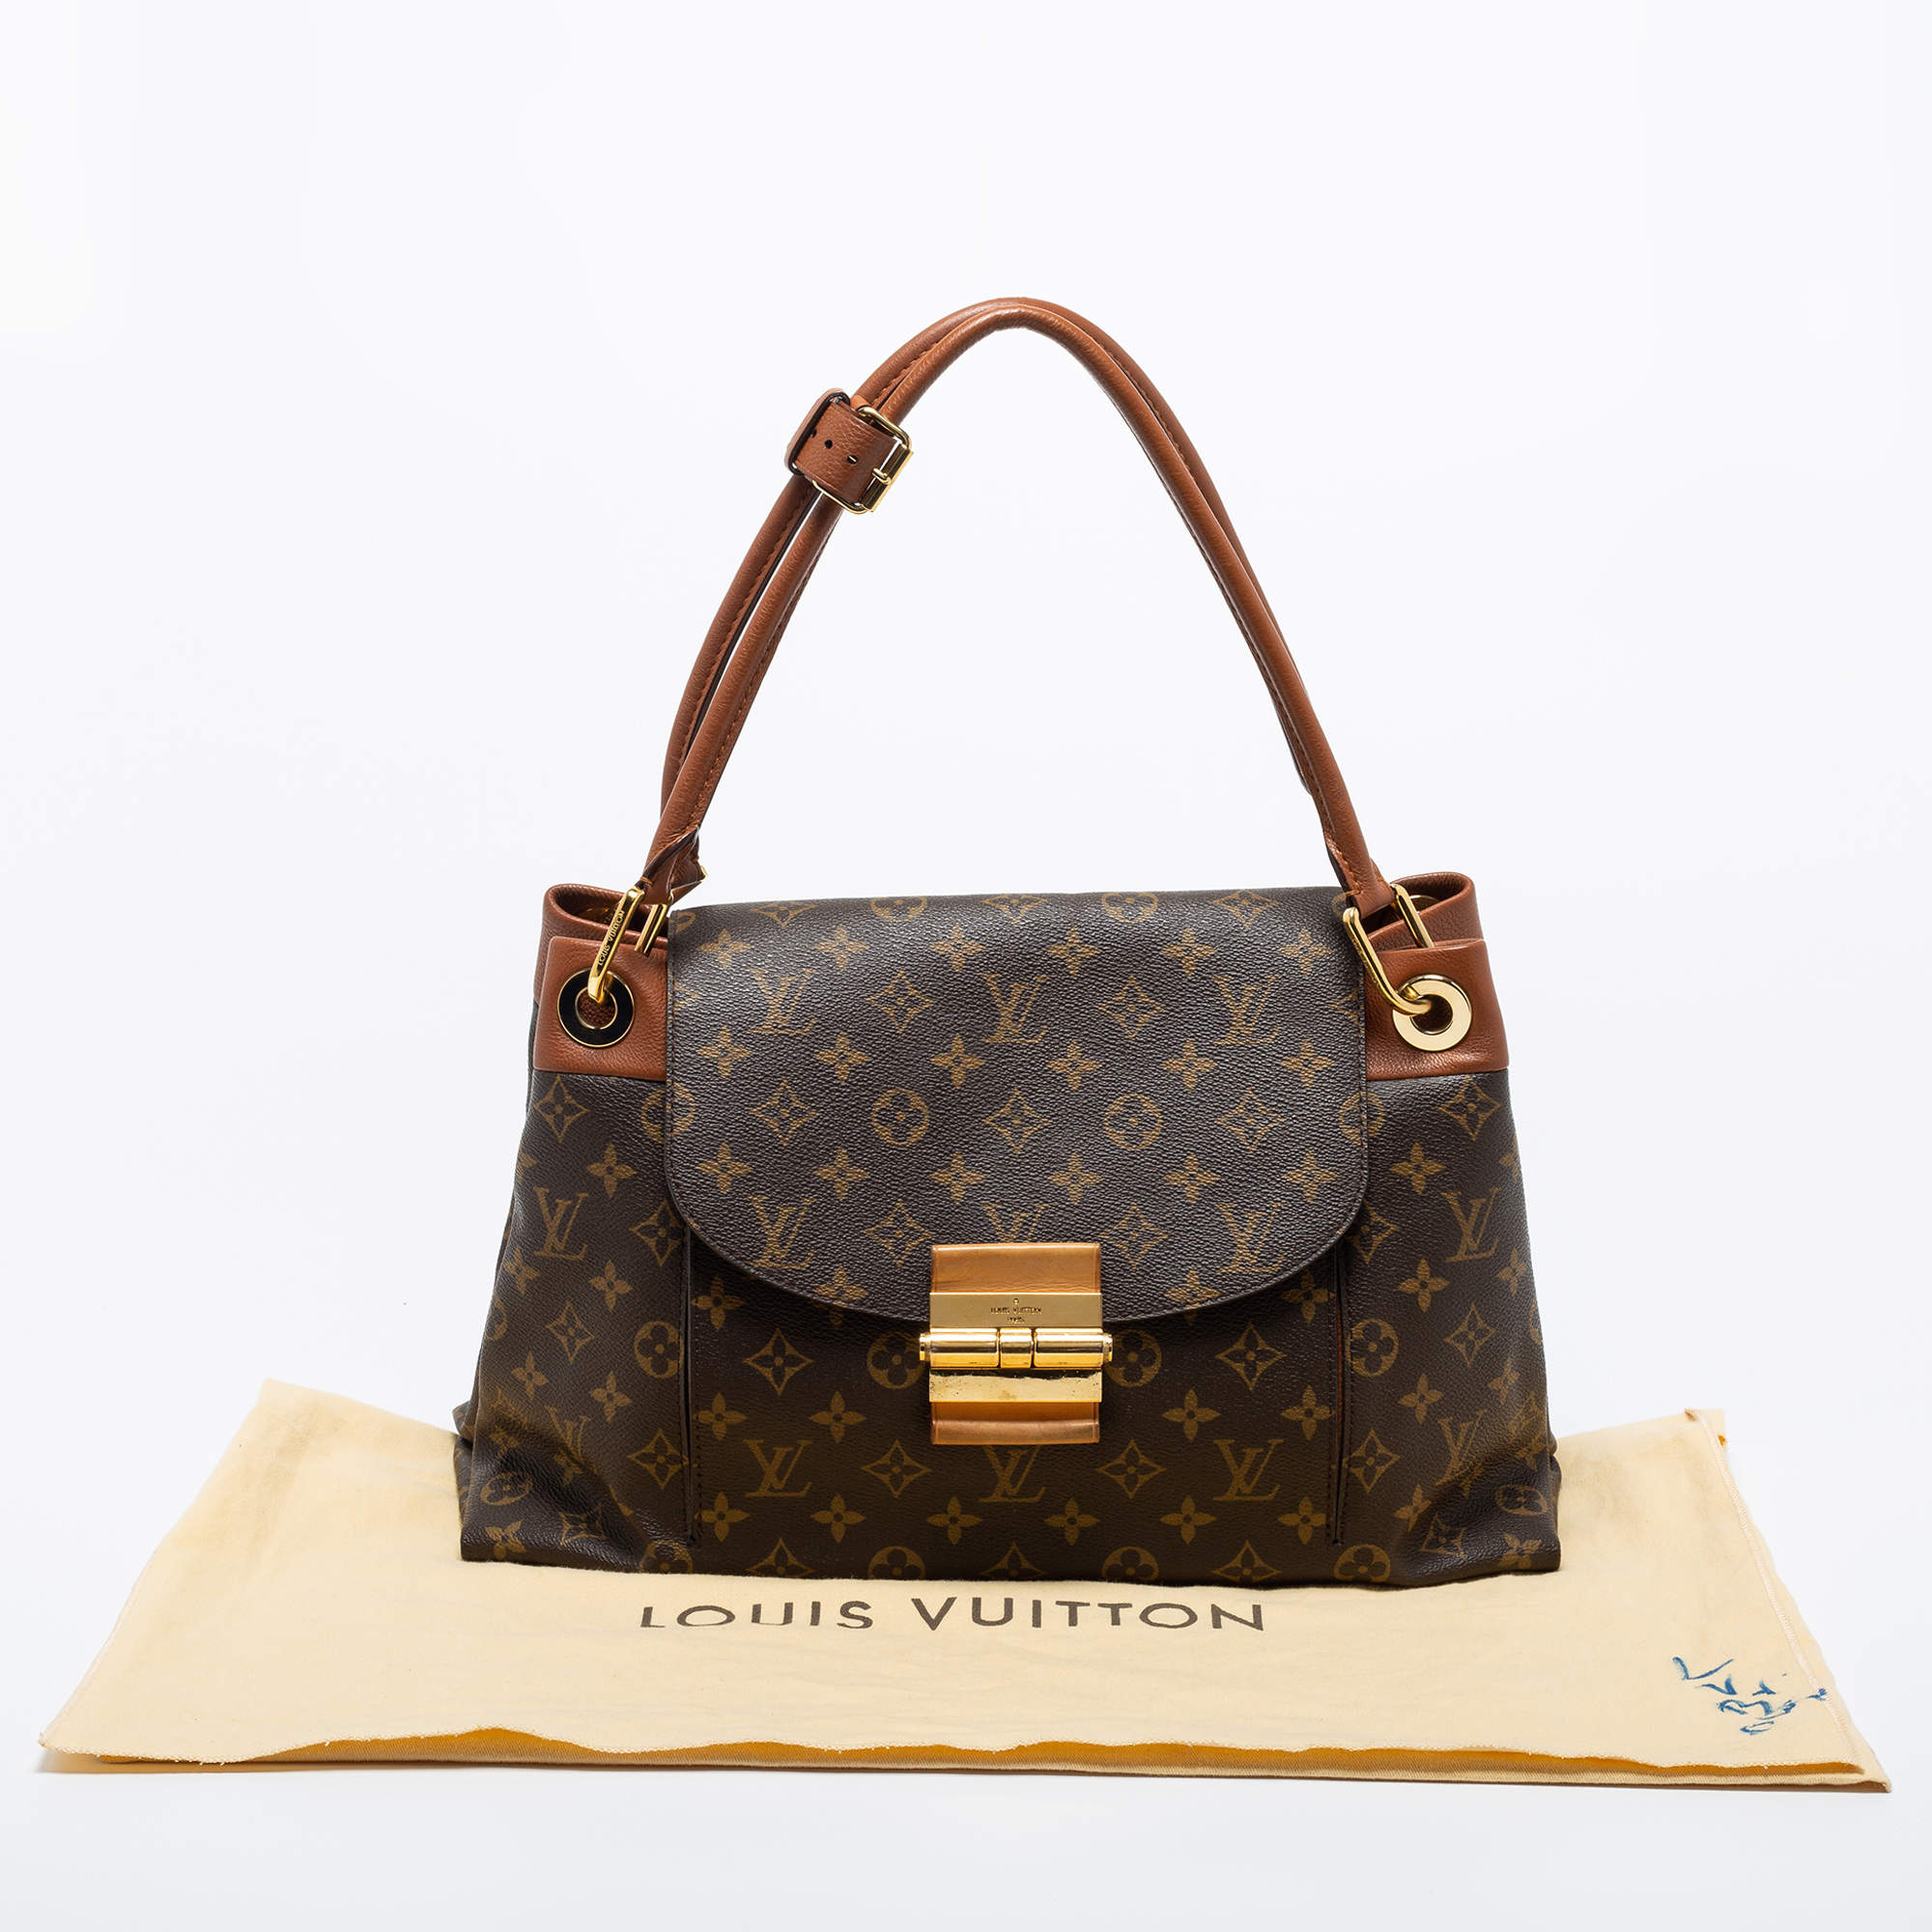 AUTHENTIC PREOWNED LOUIS VUITTON MONOGRAM OLYMPE